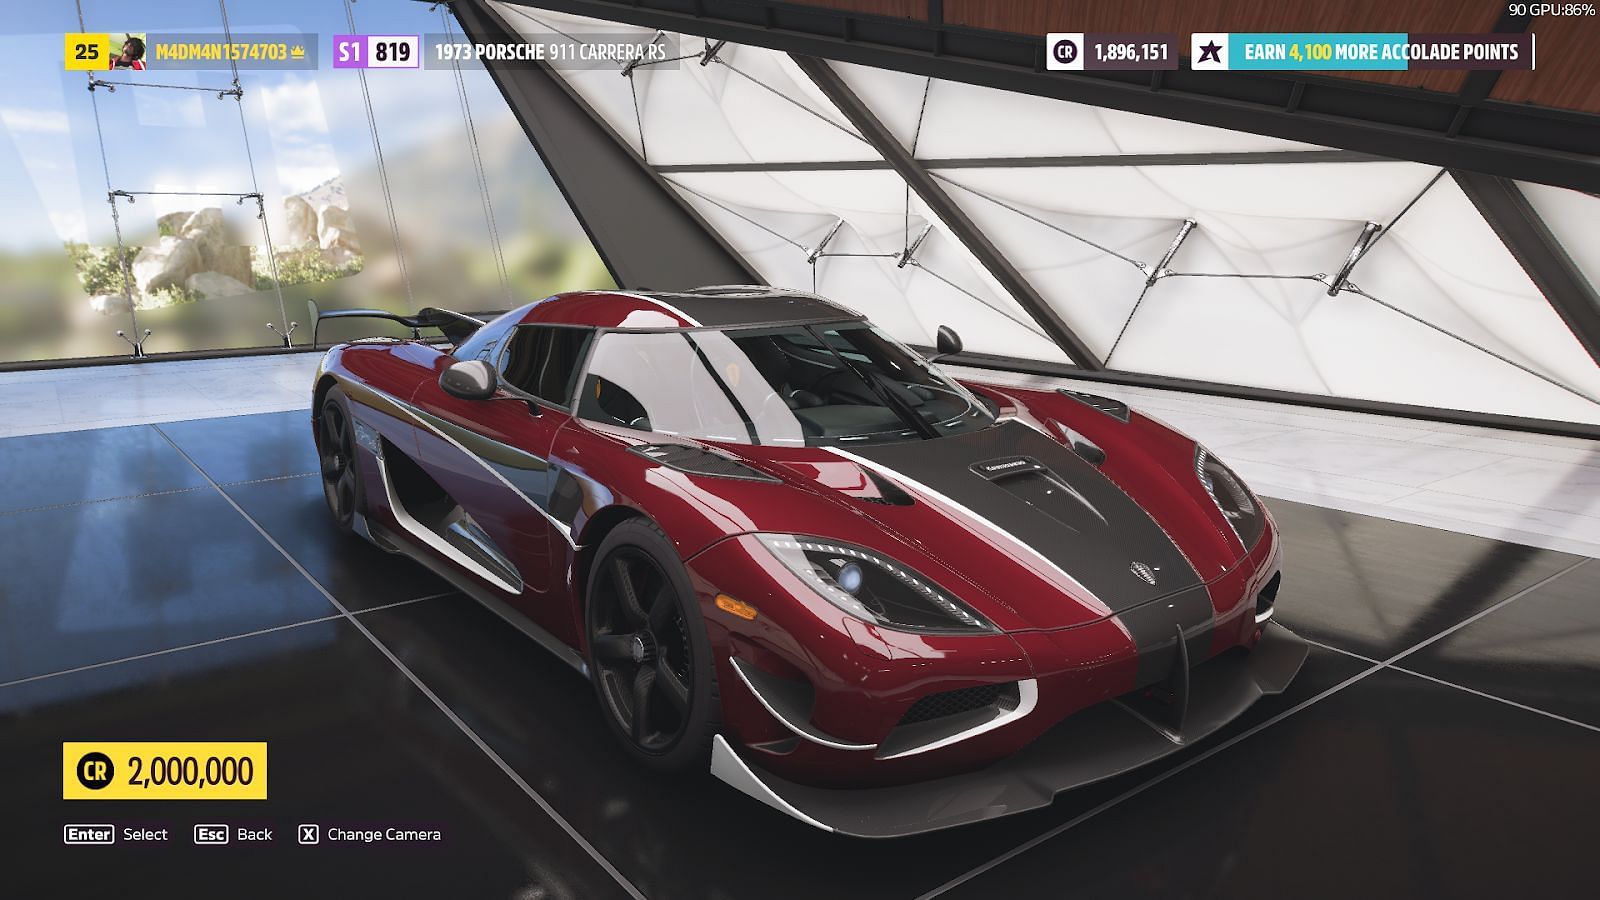 Be it Ragera or Agera, Koenigsegg knows how to make a fast car (Image via Forza Horizon 5)